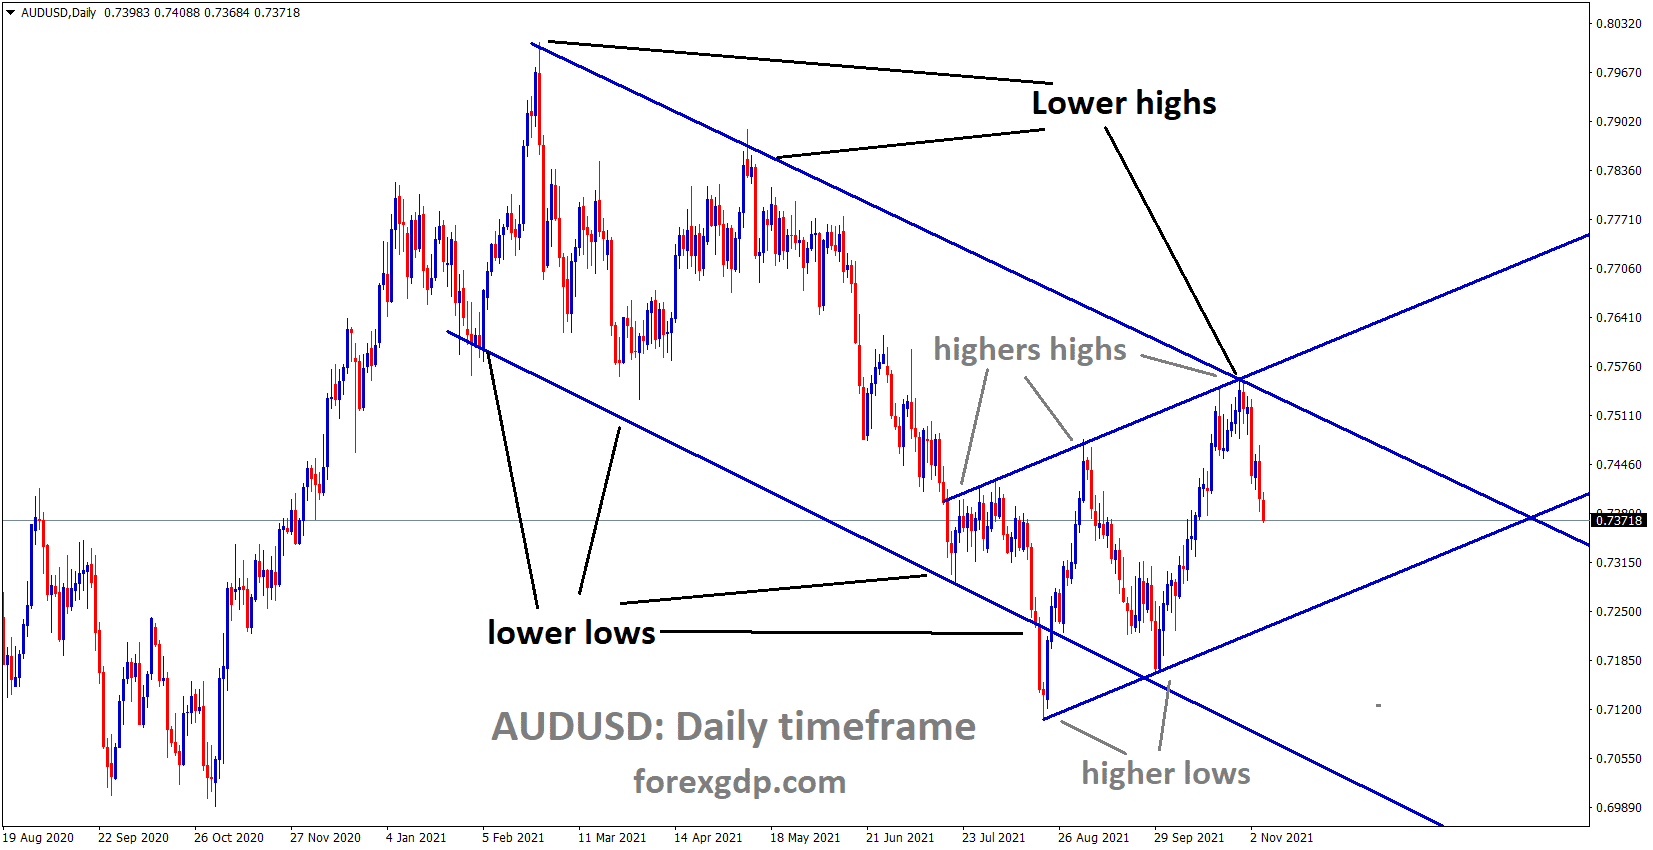 AUDUSD is moving in the Descending channel and the market fell from the Lower high